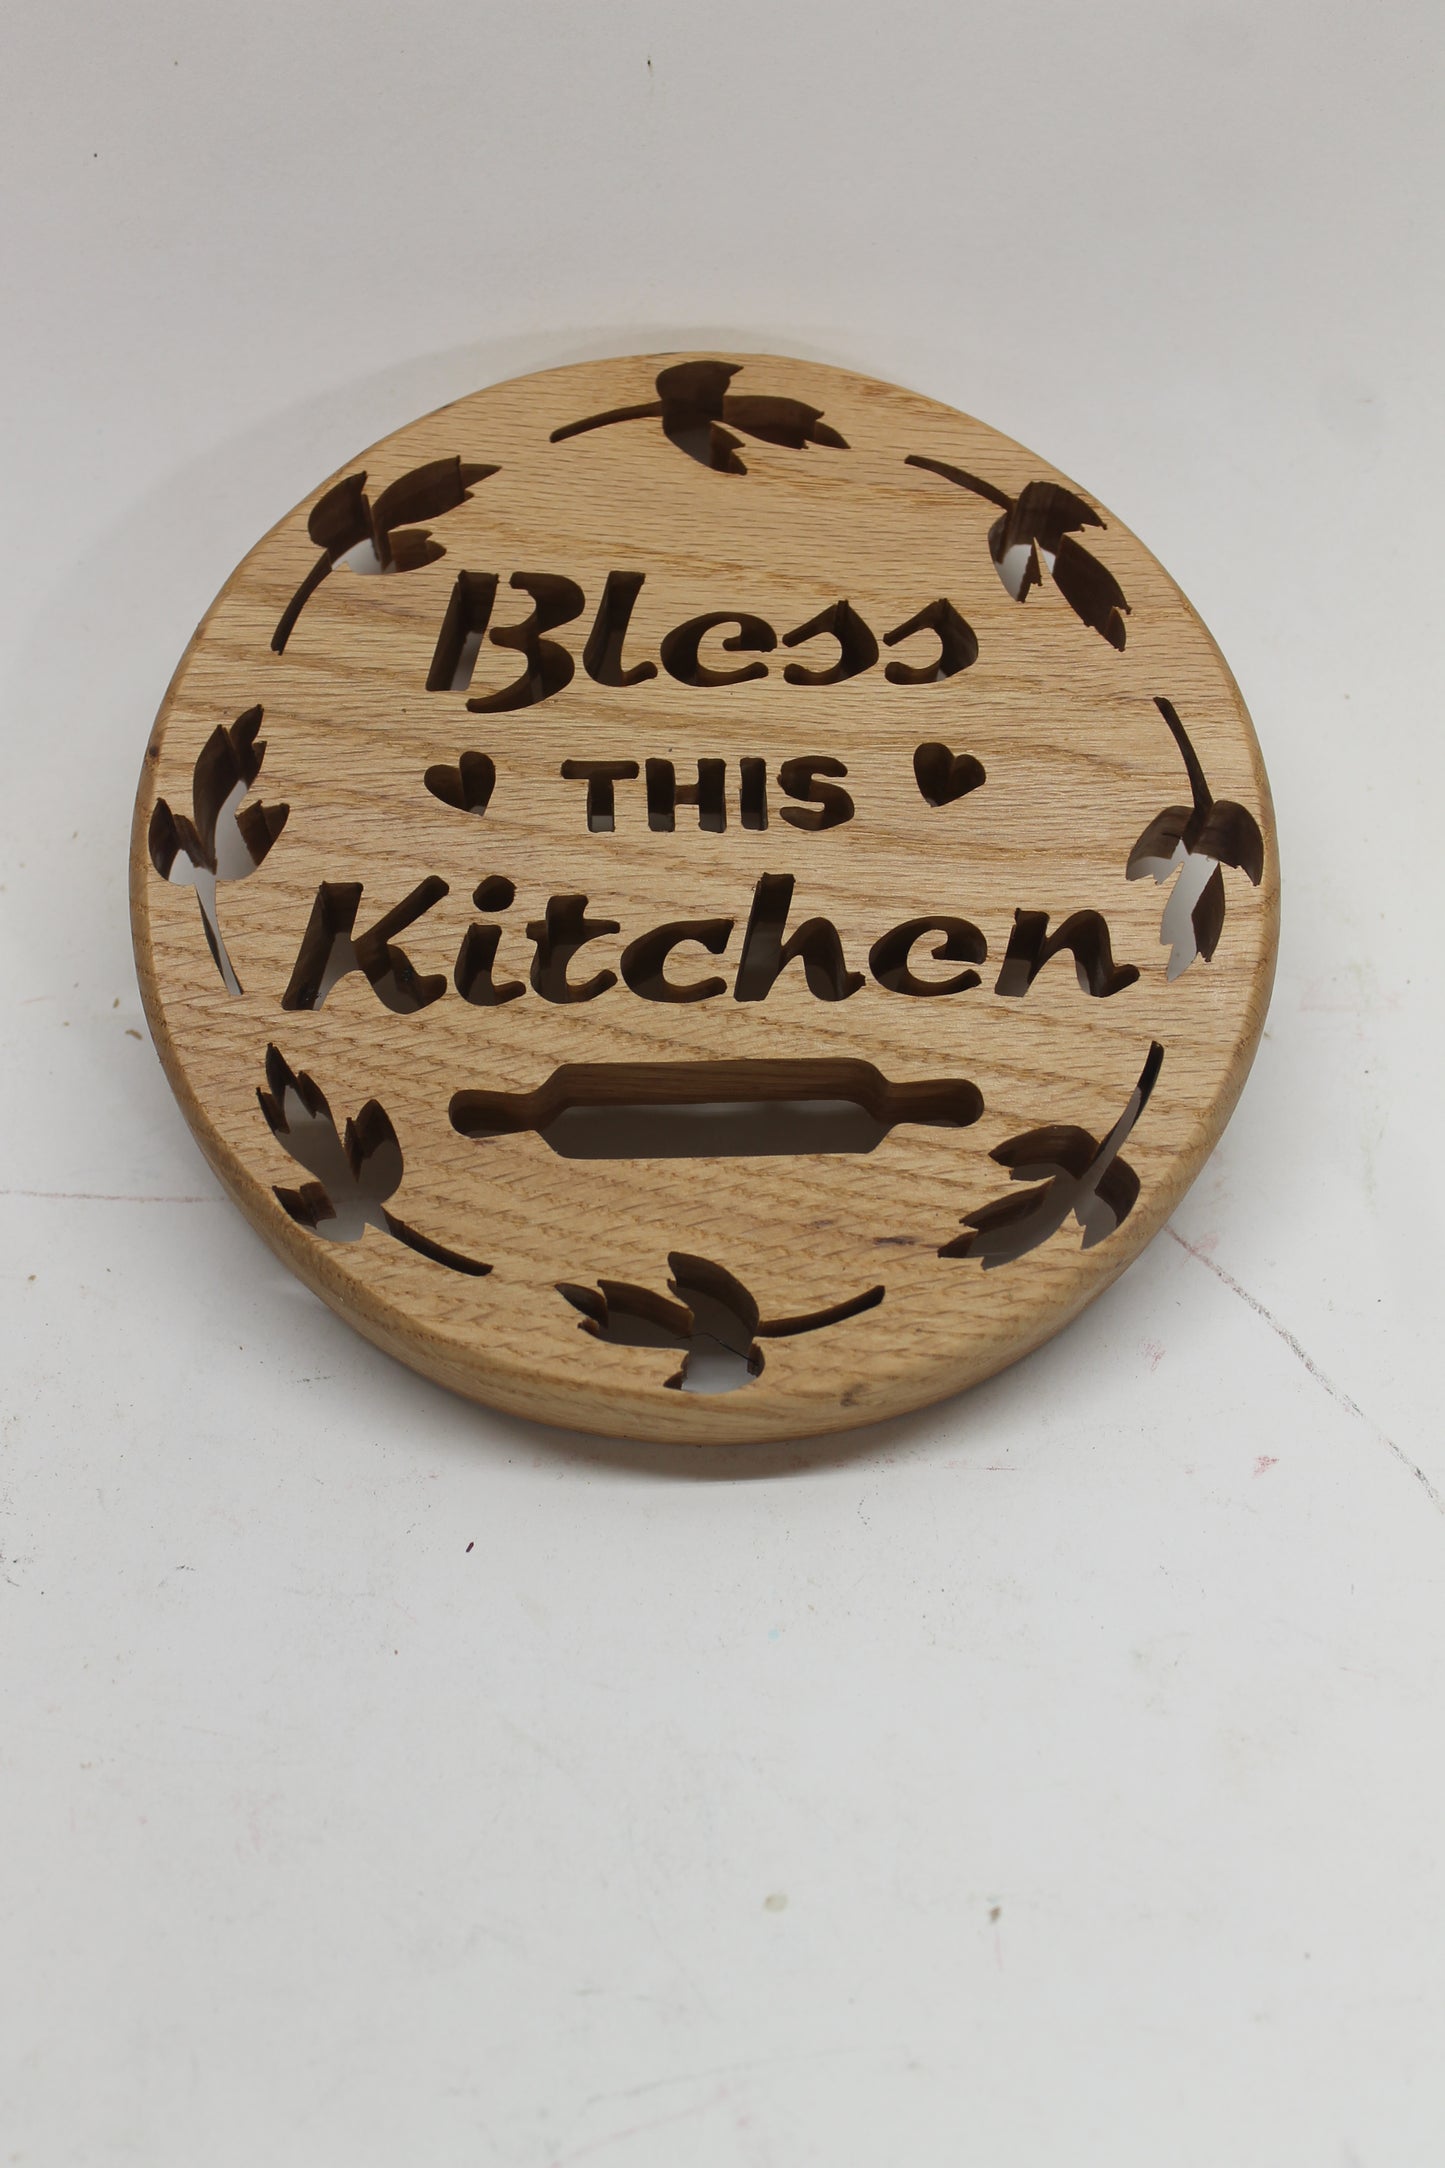 Bless this kitchen, handcrafted wood trivet from solid oak